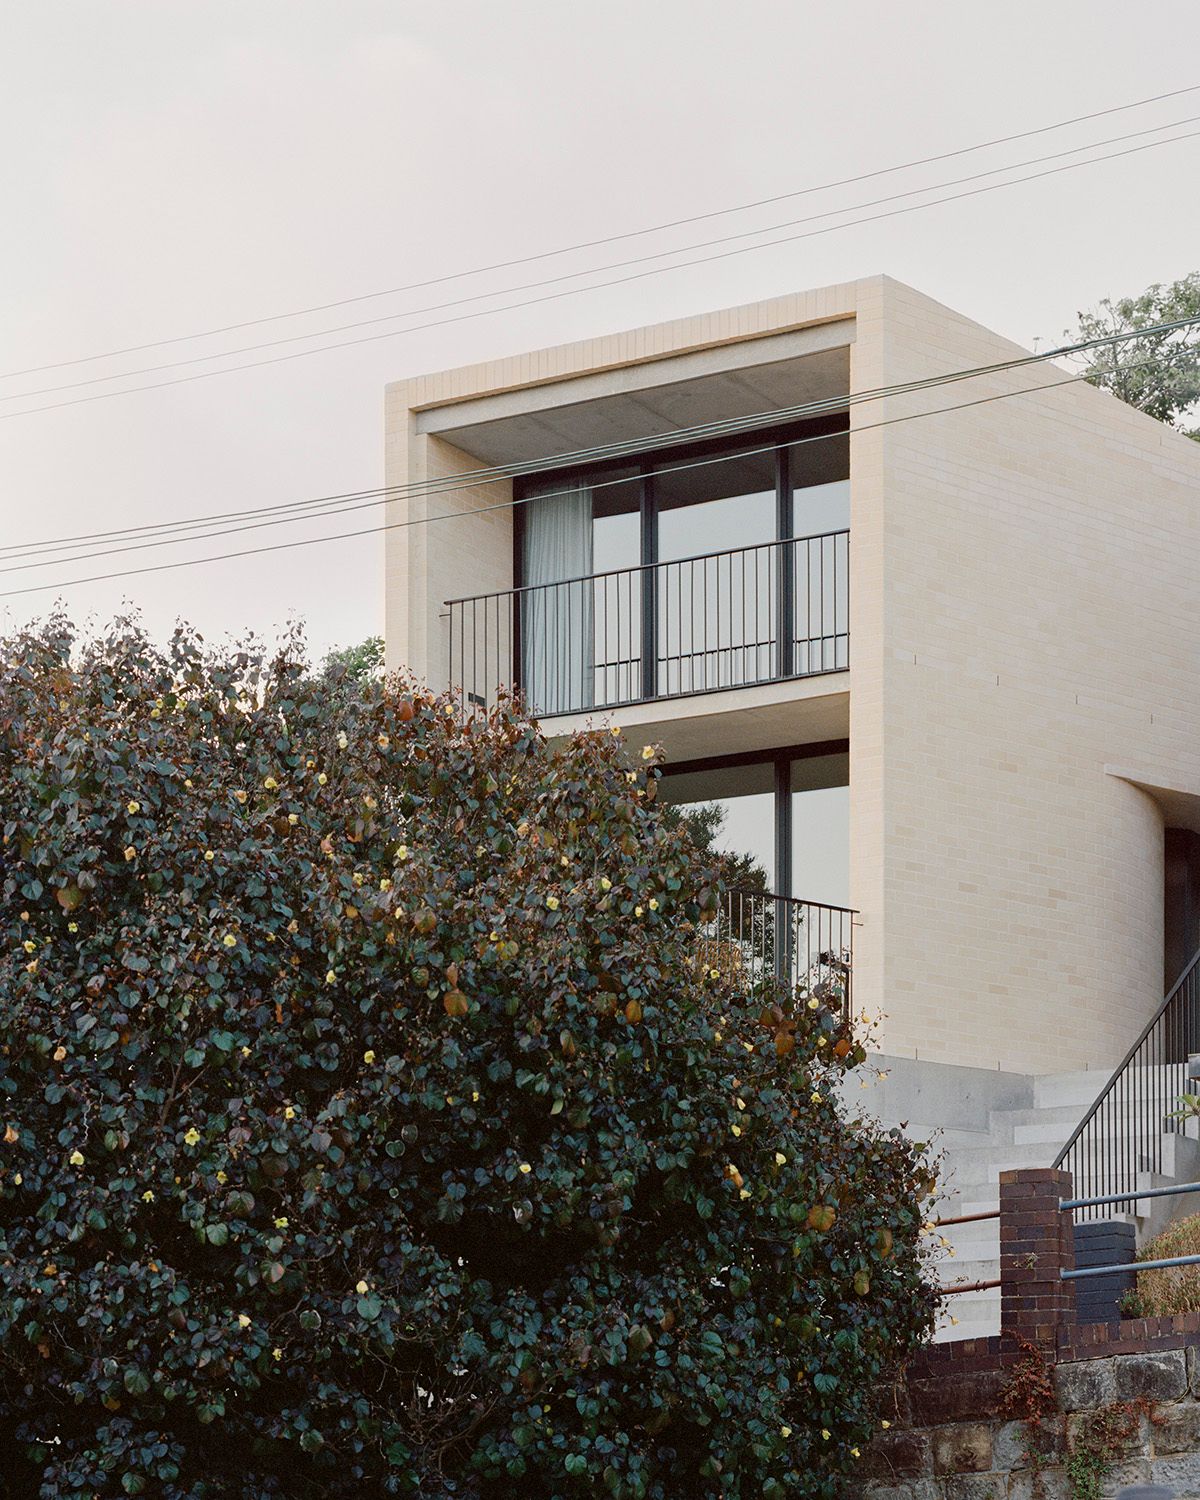 Bronte House by Tribe Studio Architects showing brick external facade